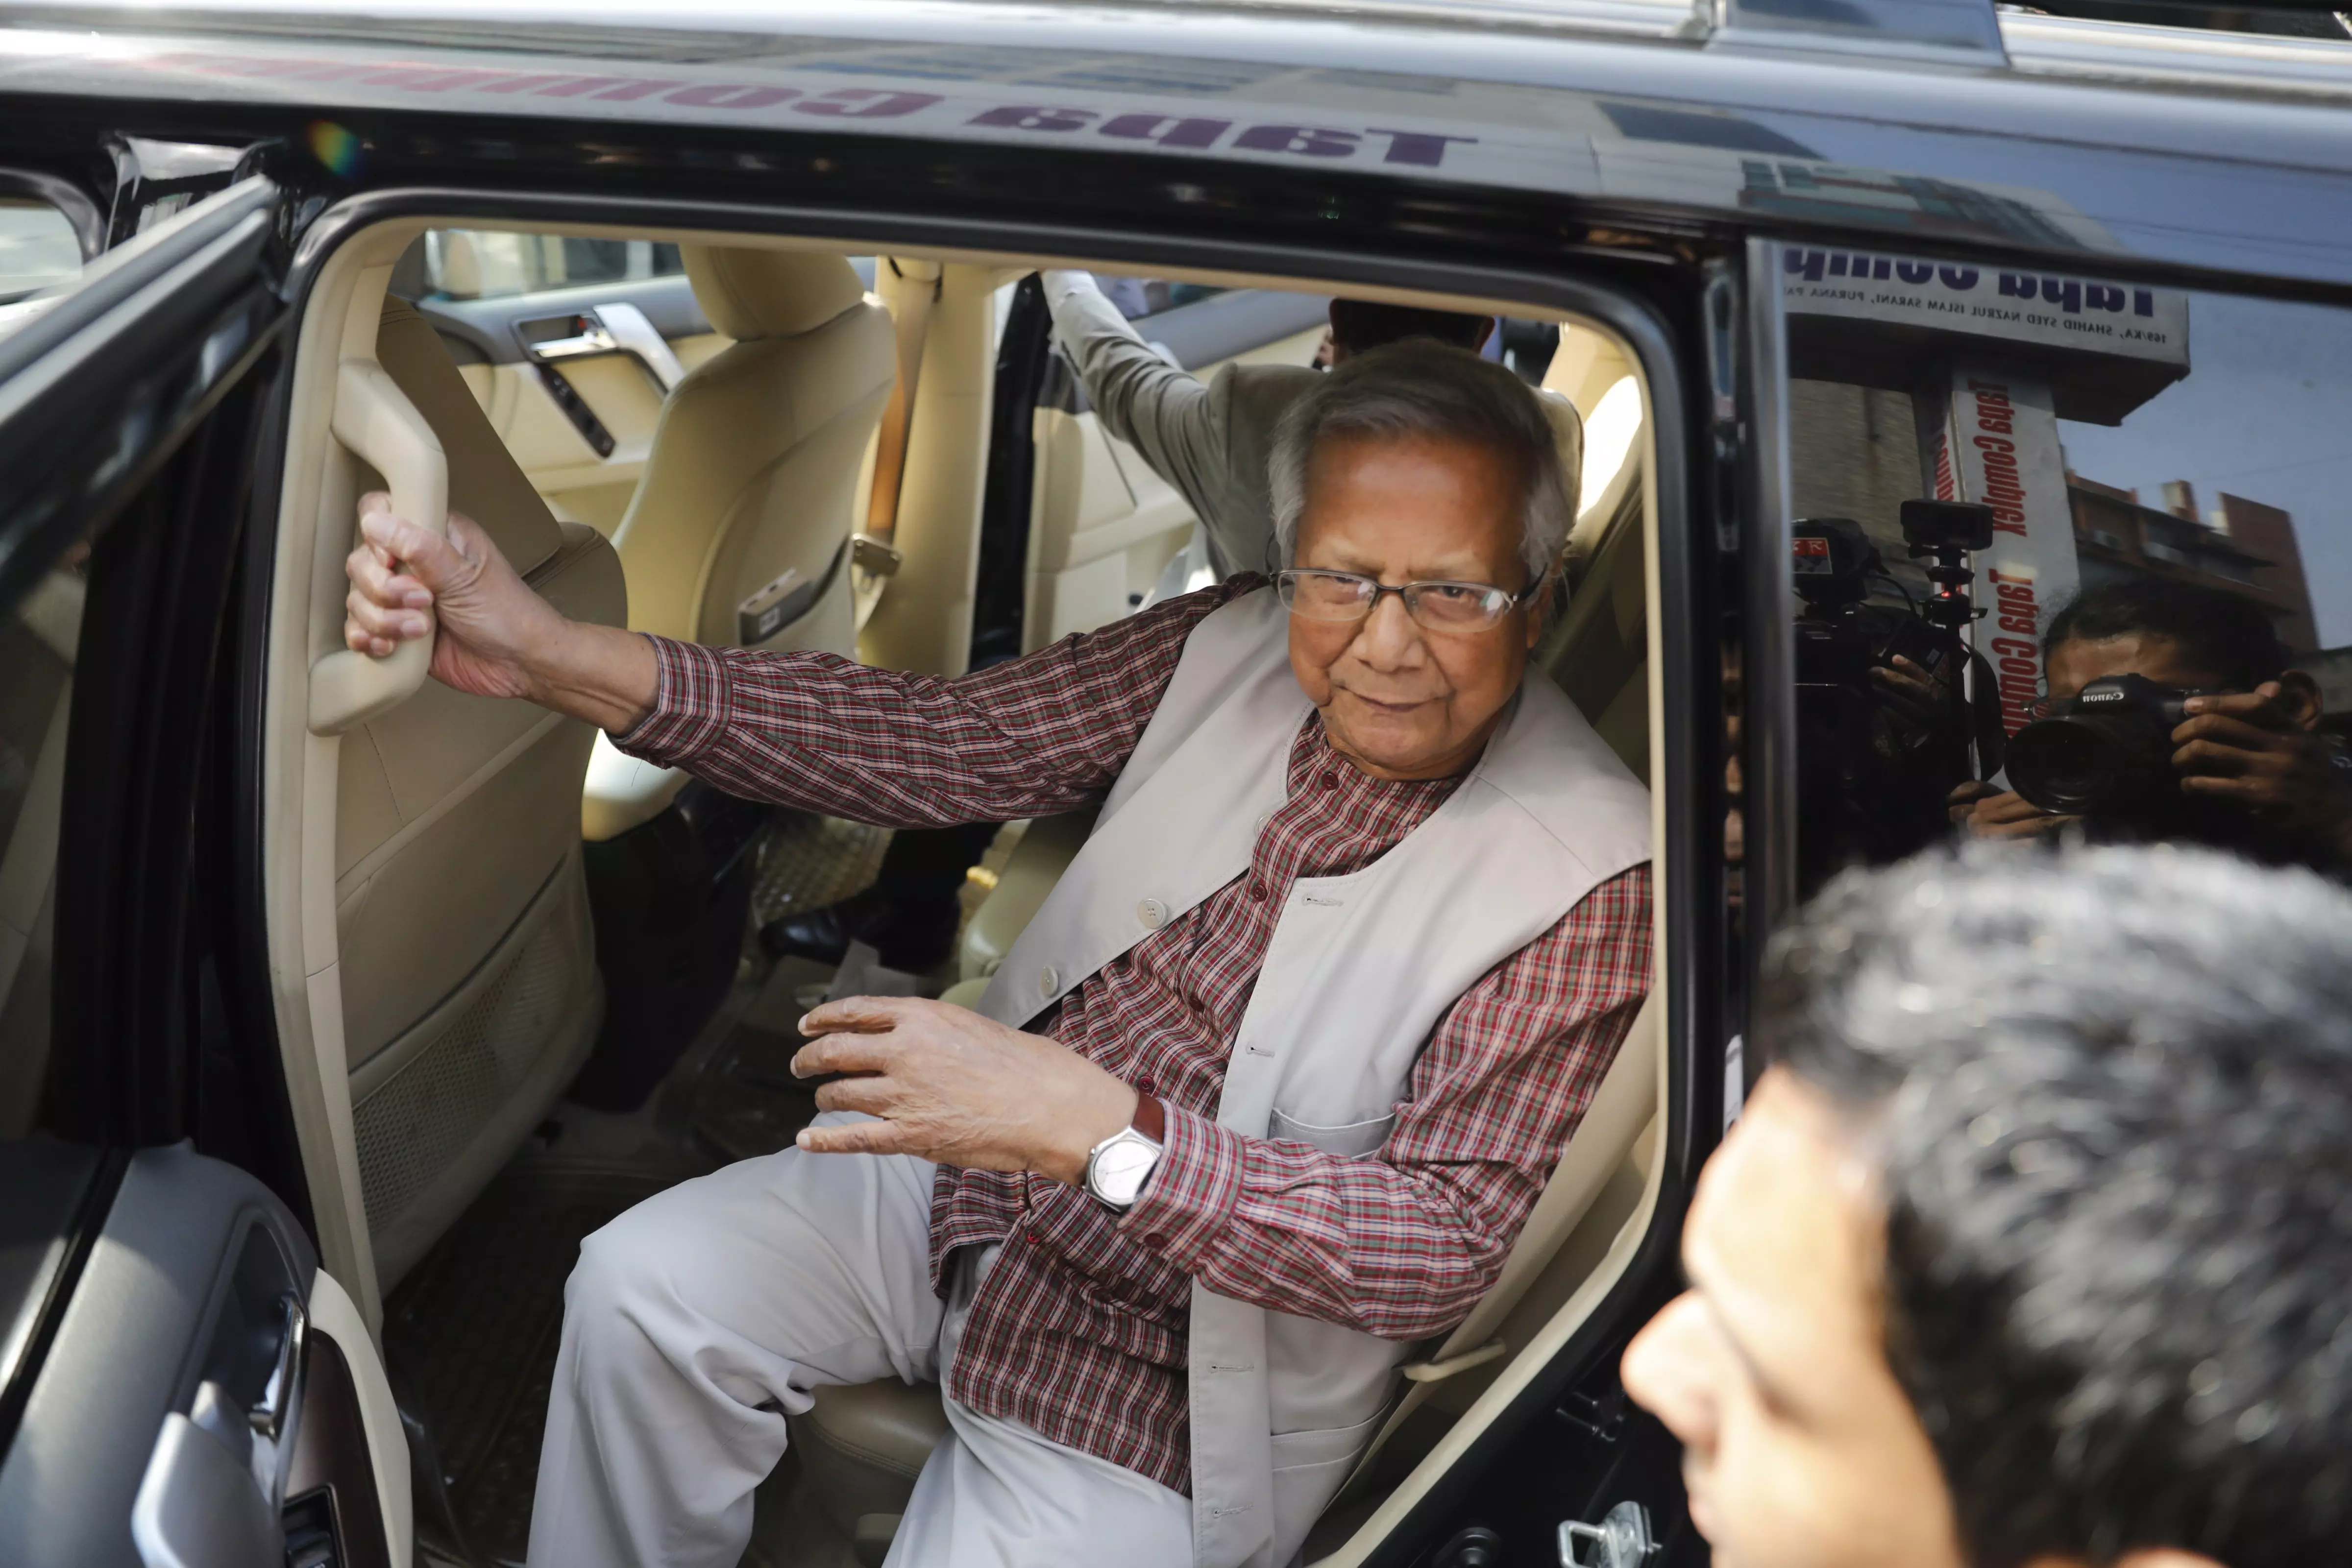 Bangladesh court sentences Nobel laureate Yunus to 6 months in jail, politically motivated, say supporters